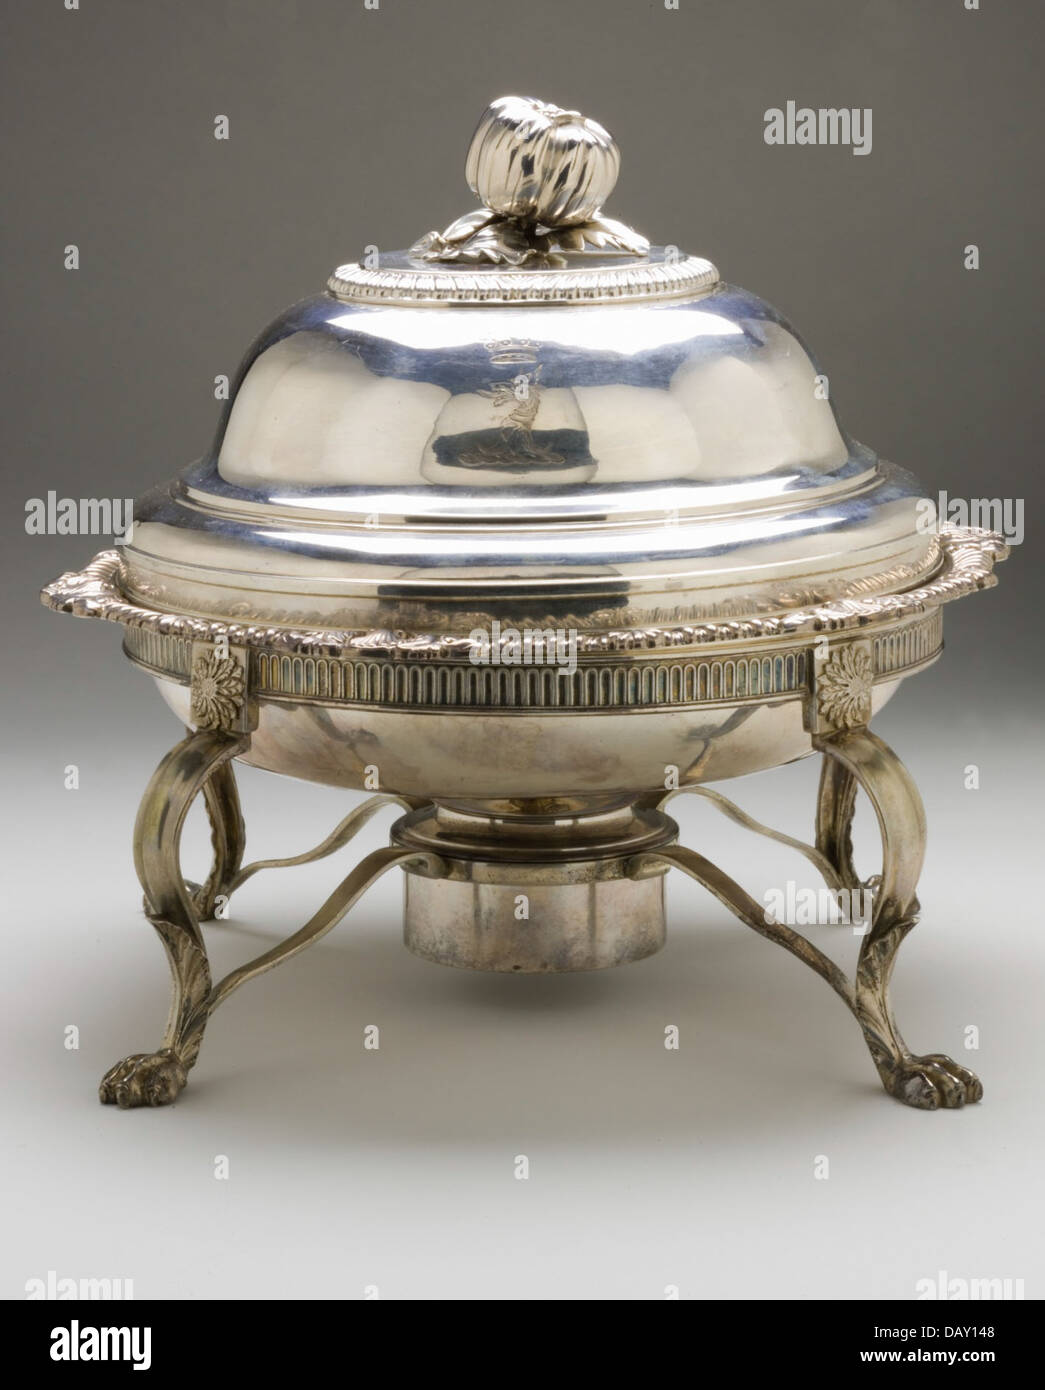 Entree Dish with Cover and Warming Stand with Burner M.2007.150.2a-e Stock Photo